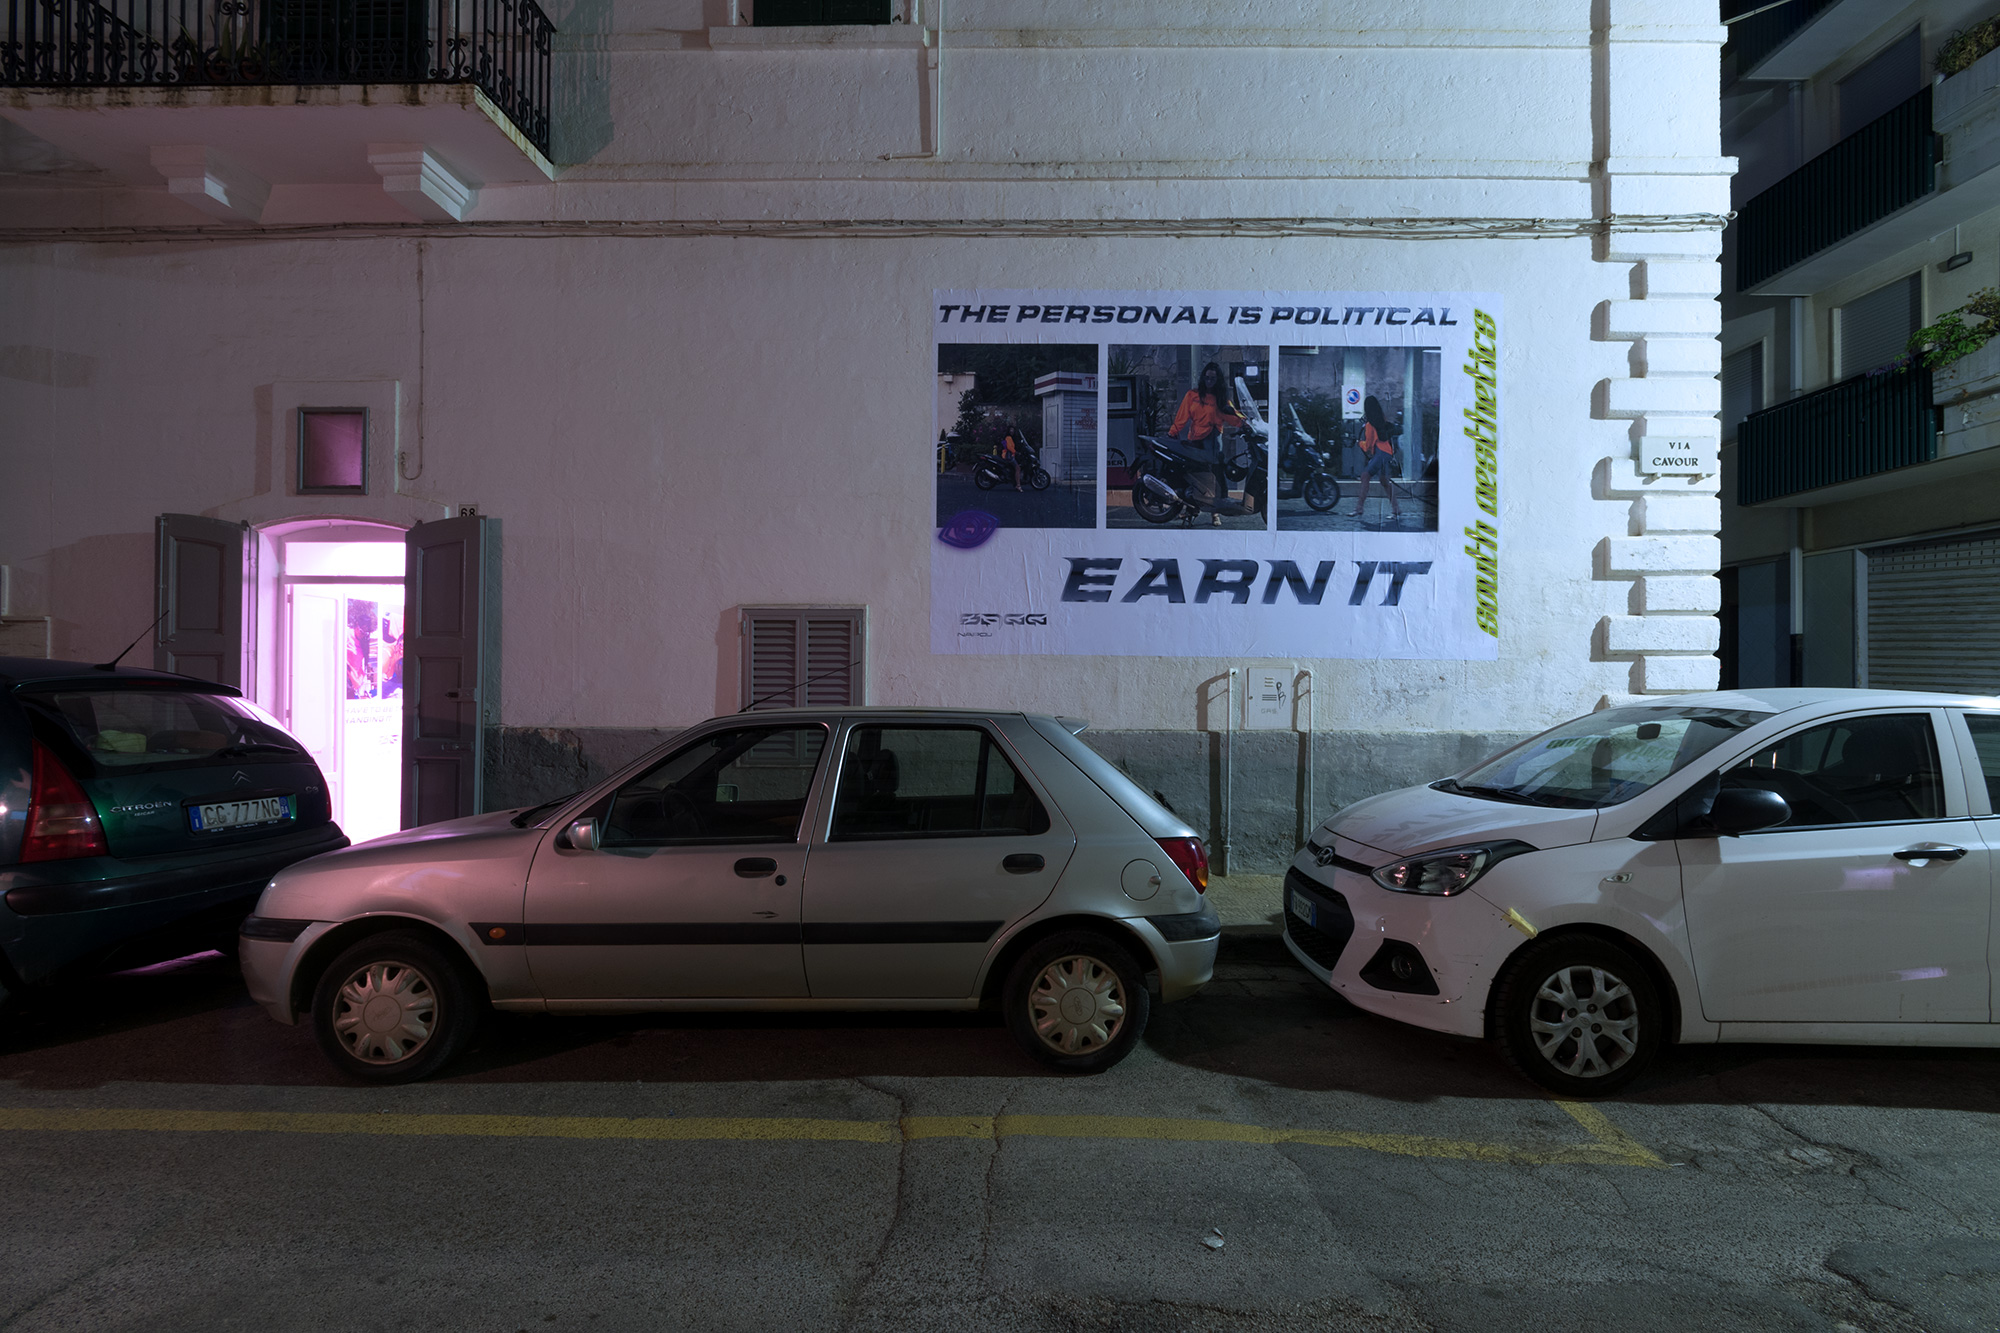 SAGG Napoli, The personal is political - Earn it. 2018 - Digital collage on billboard, lights, 500 x 350 cm. (Night view)